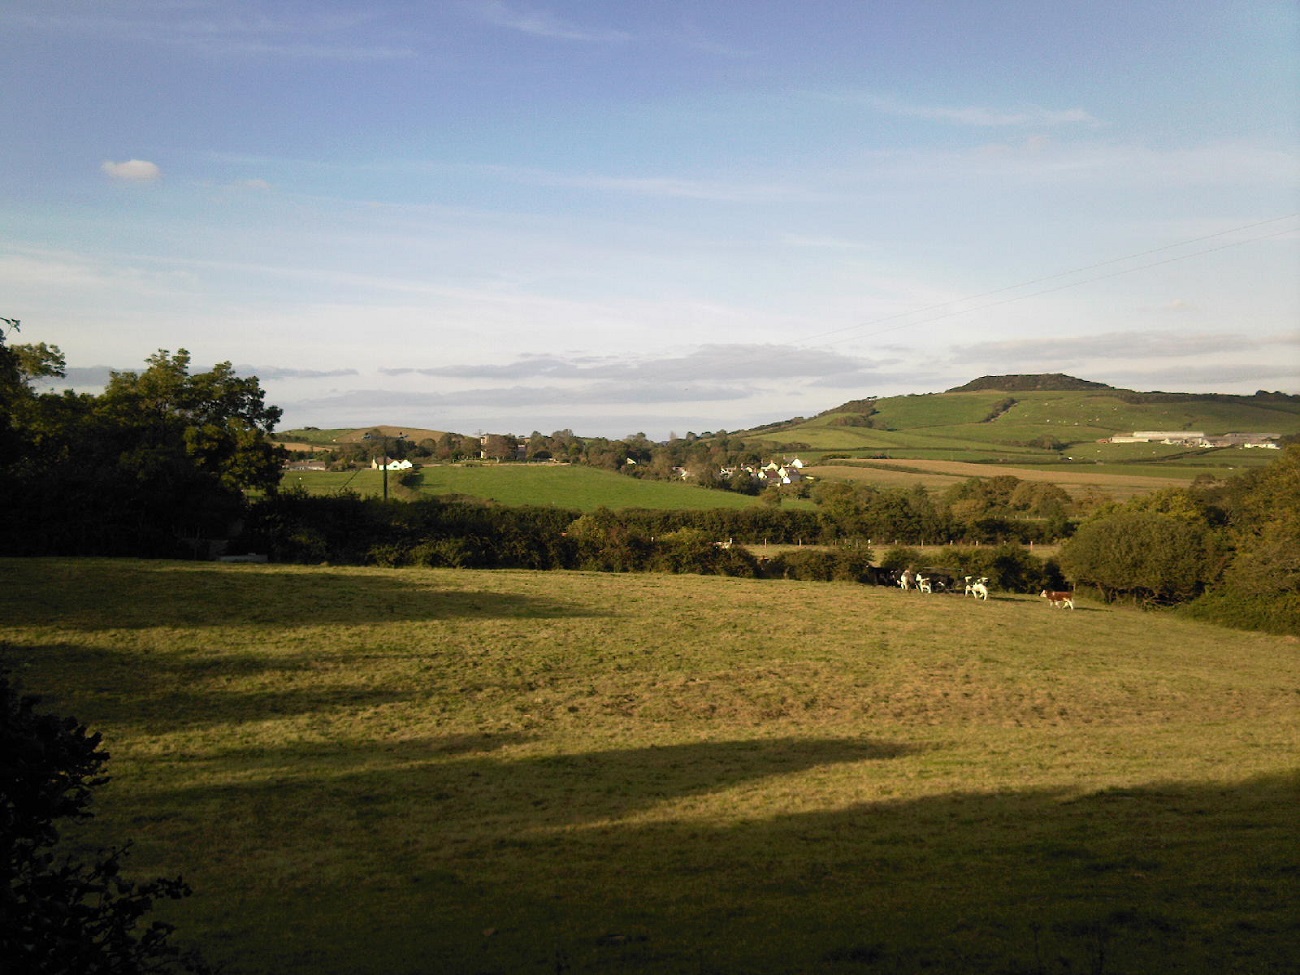 A rural scene on a sunny evening with a large field in the foreground holding some cattle, with a large hill in the background. The low sun casts long shadows across the field.